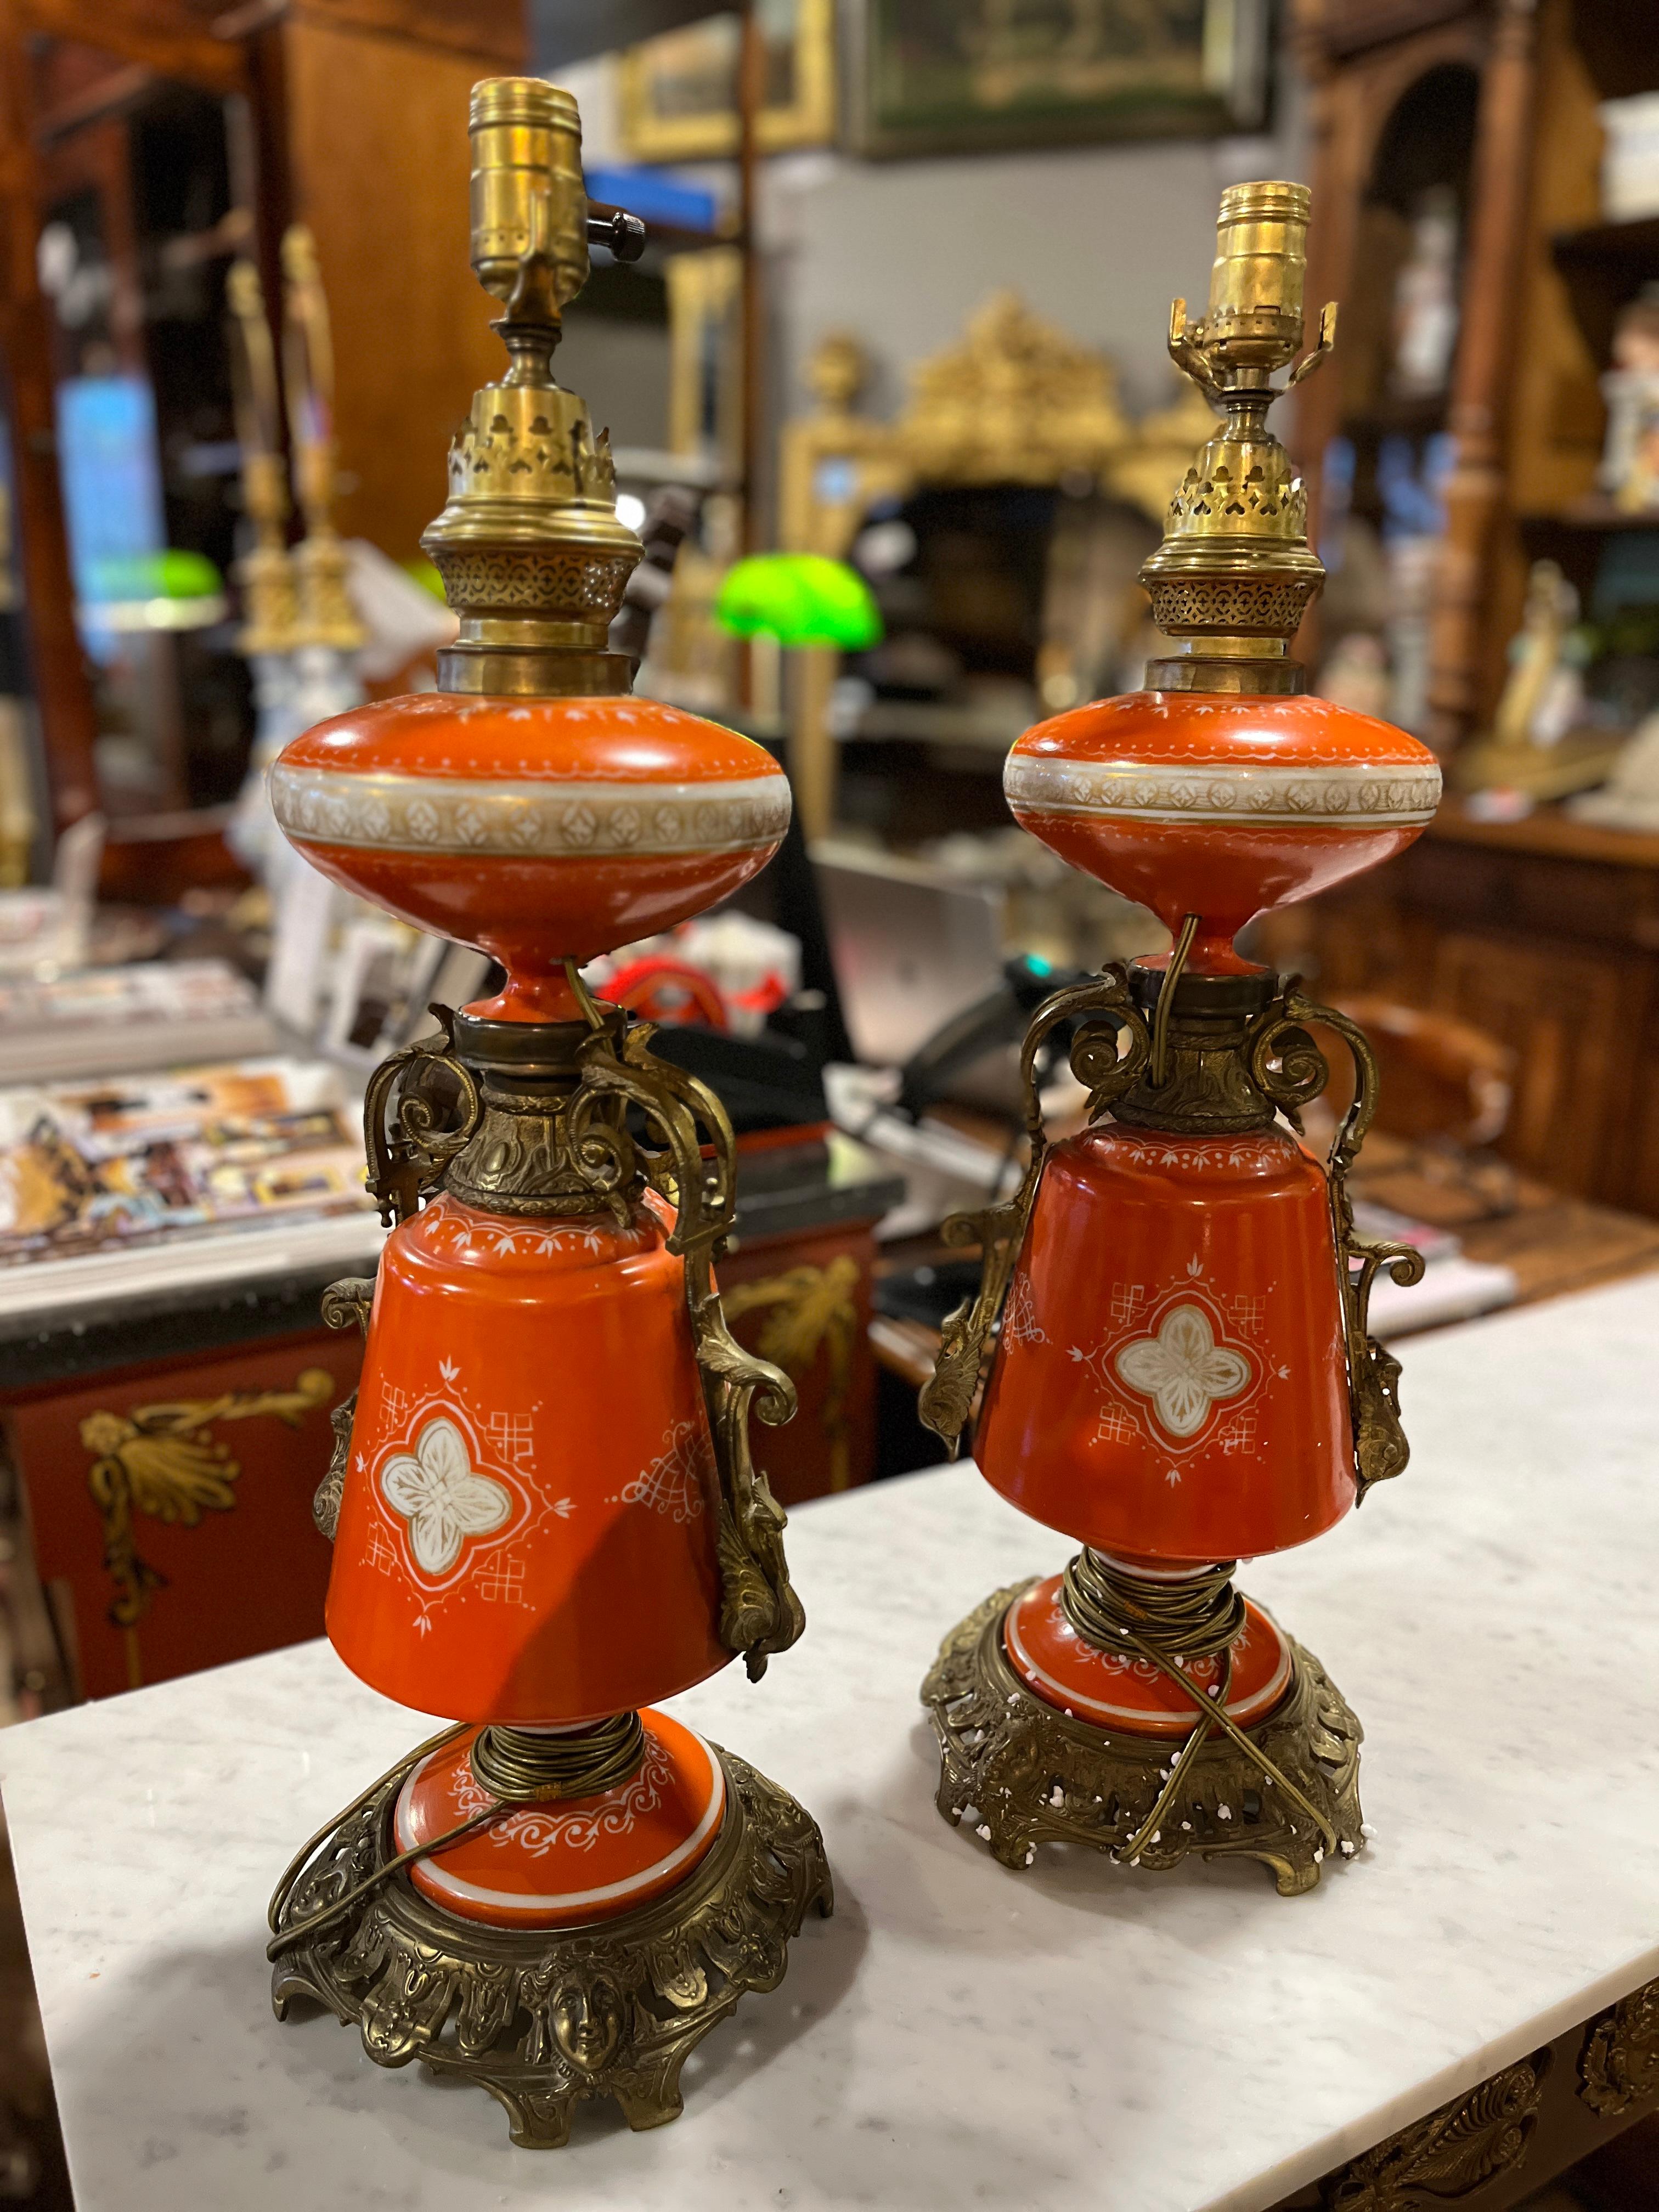 Pair of 19th Century French Lamps with Neoclassical scene. Appropriate age and wear and just a beautiful shade of persimmon orange.